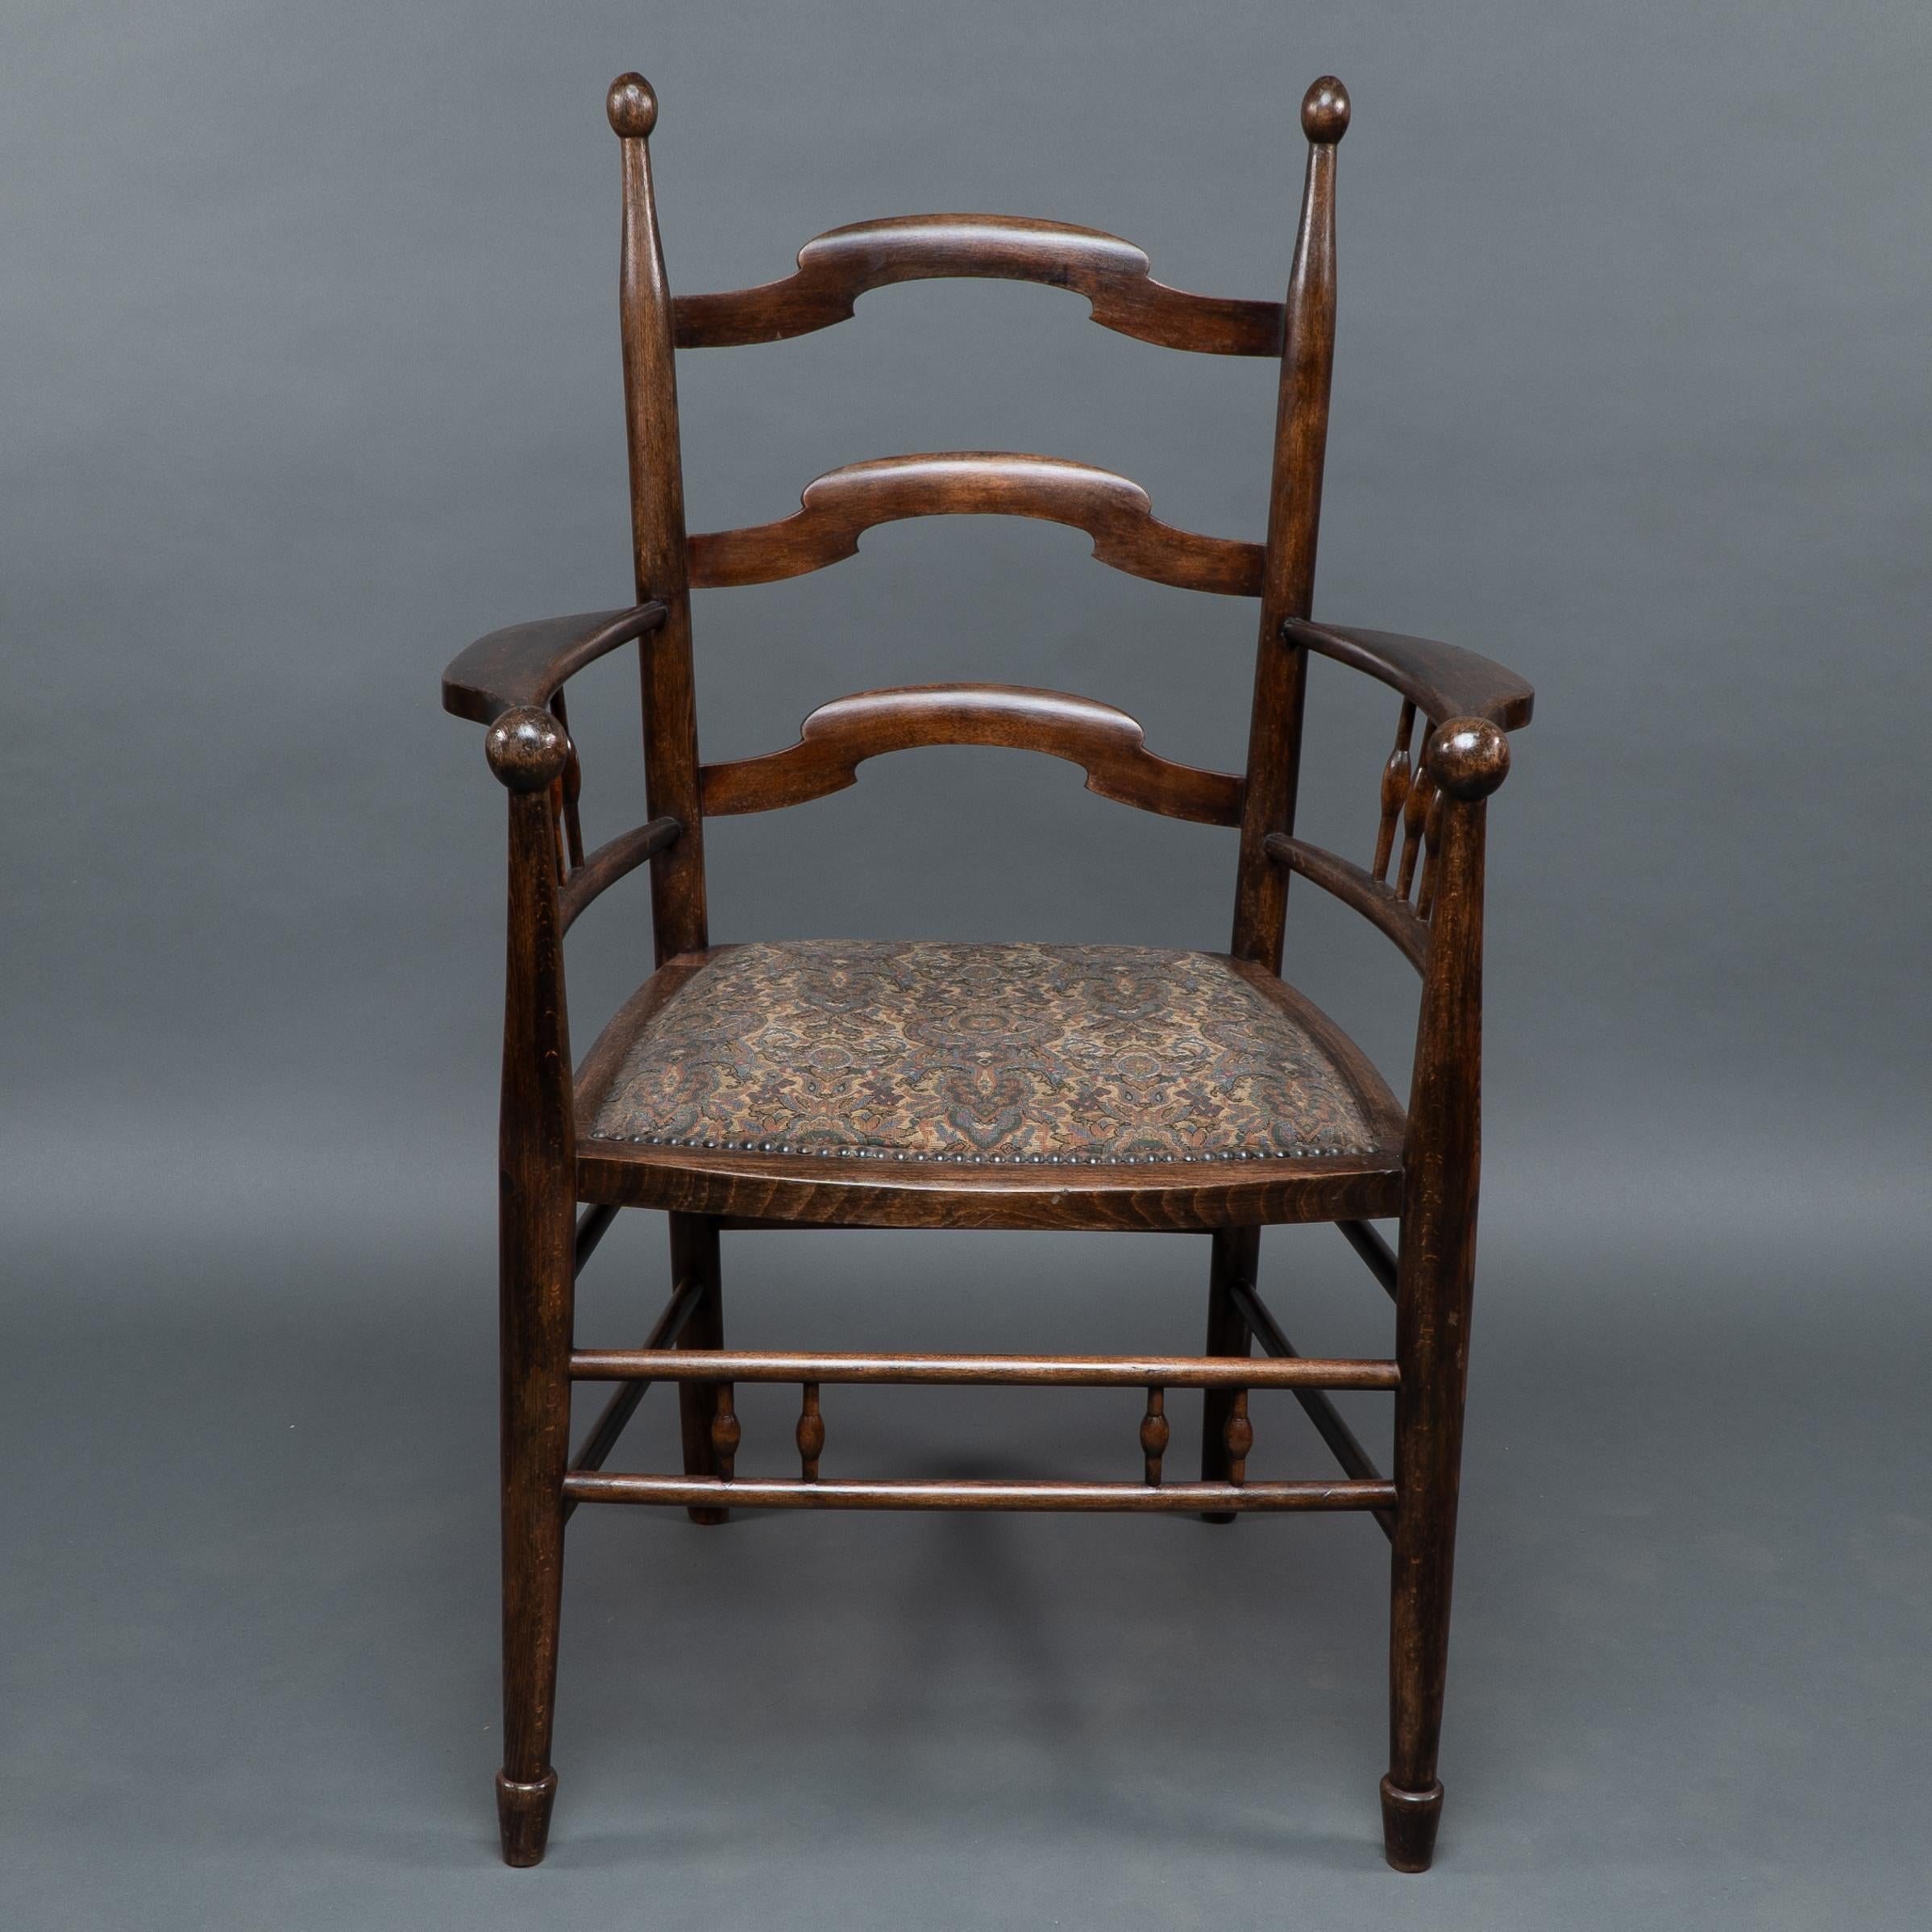 Liberty & Co attributed made by William Birch. 
An English Arts & Crafts shaped ladder back armchair with ball finials to the back and to the front of the arms with turned supports below and further turned supports uniting the stretchers stood on